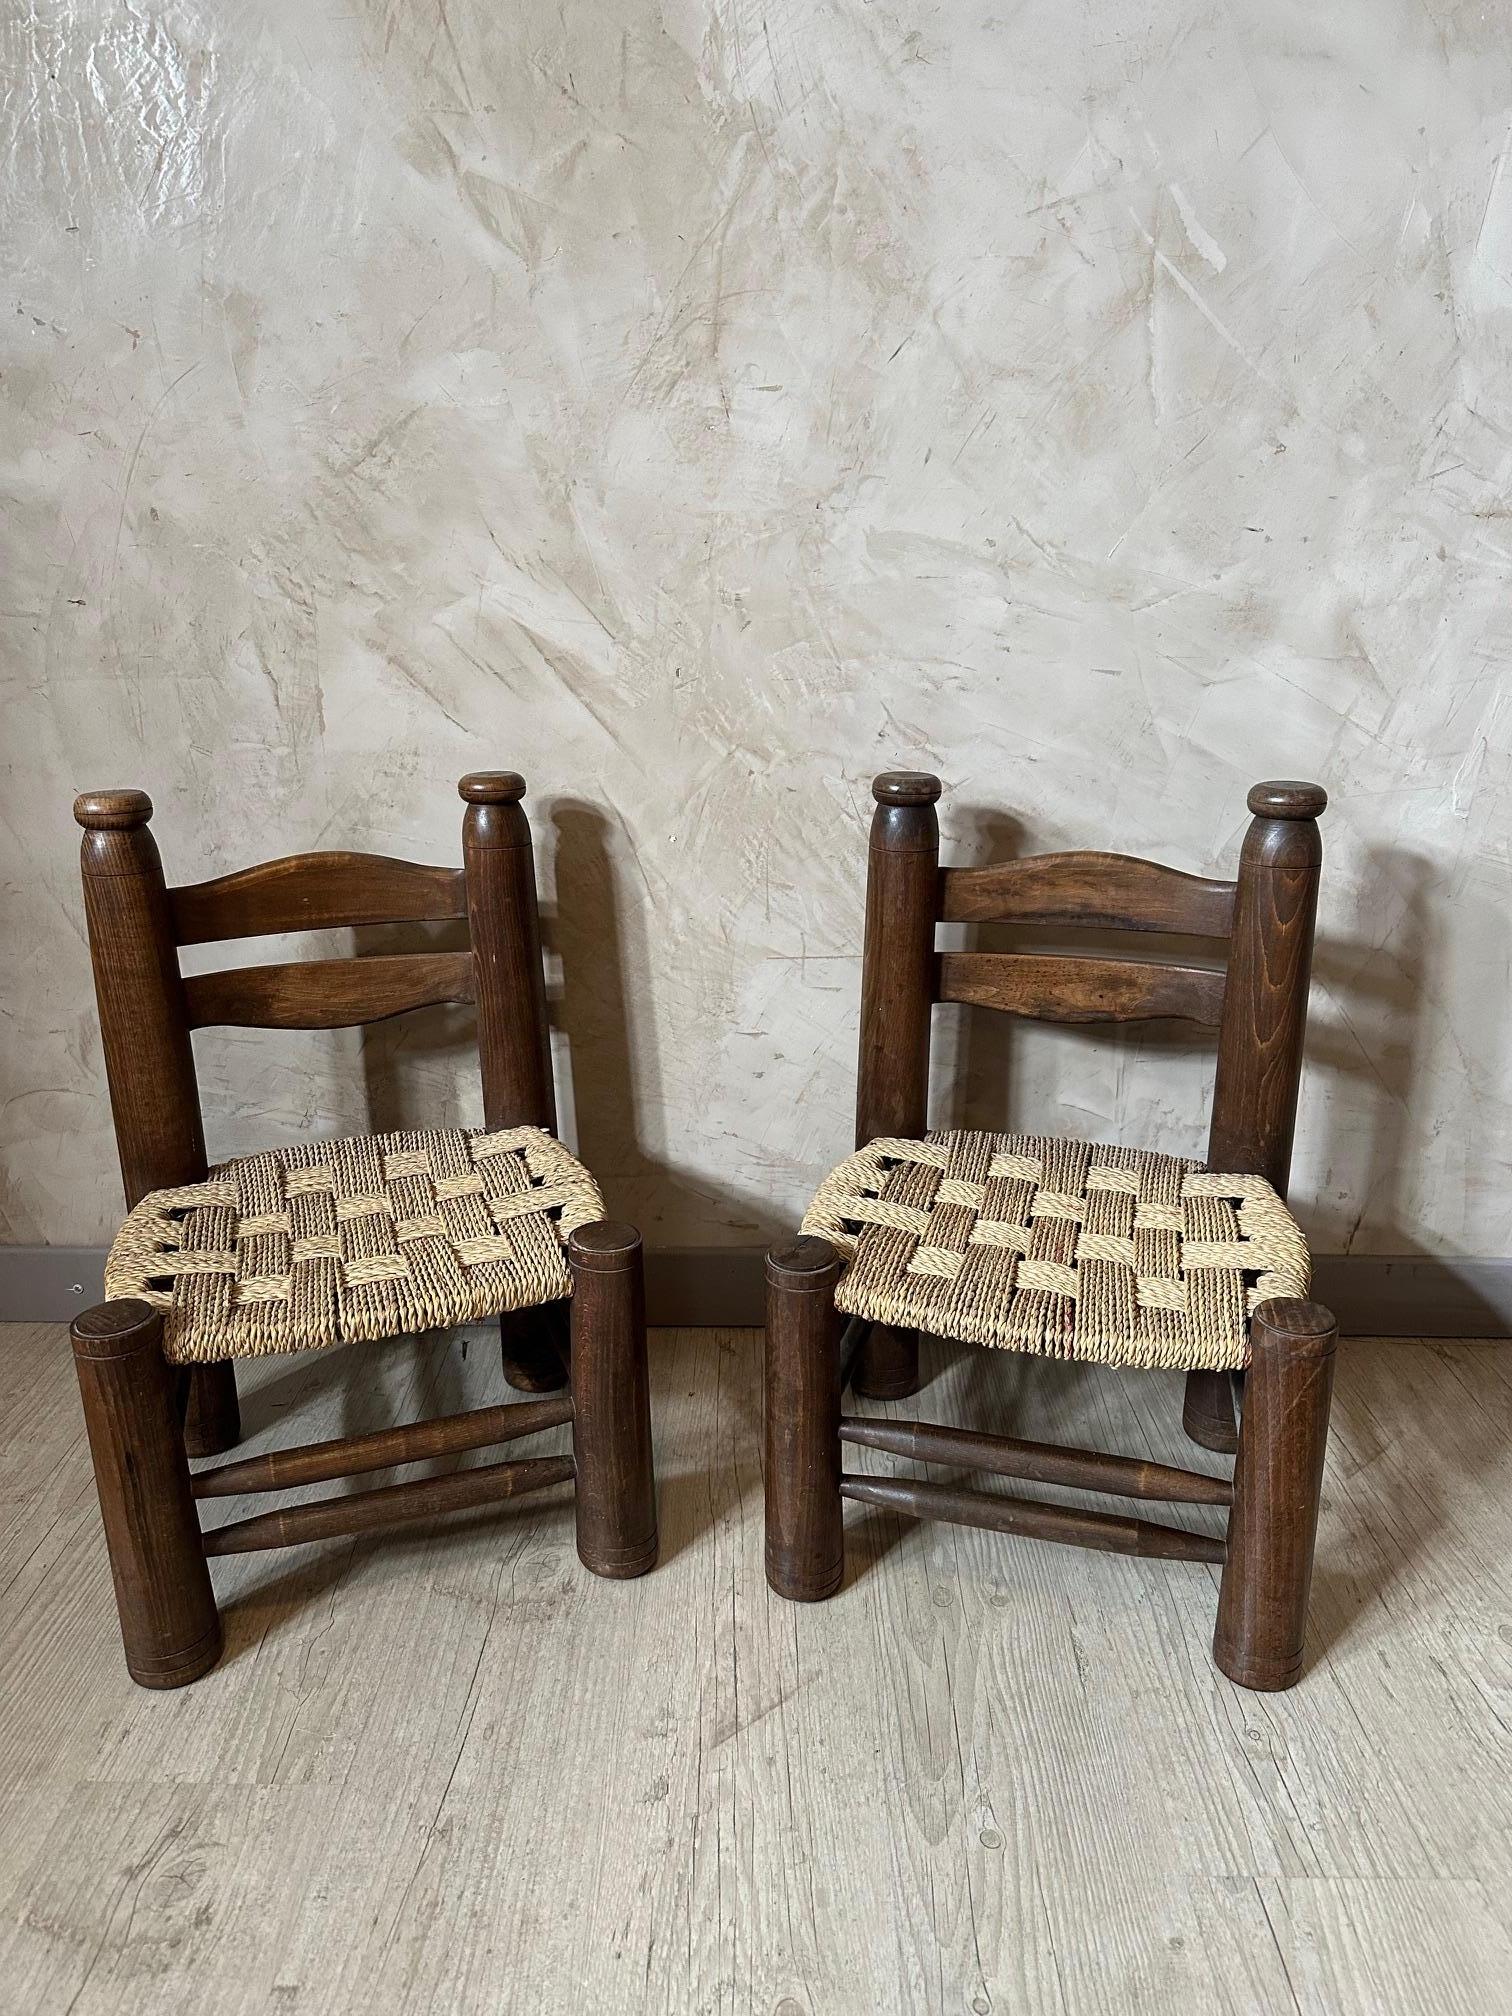 Very nice pair of children's chairs in solid oak and woven rope seats from the 1950s in the style of French designer Charles Dudouyt, represents a rustic style Good condition overall.
